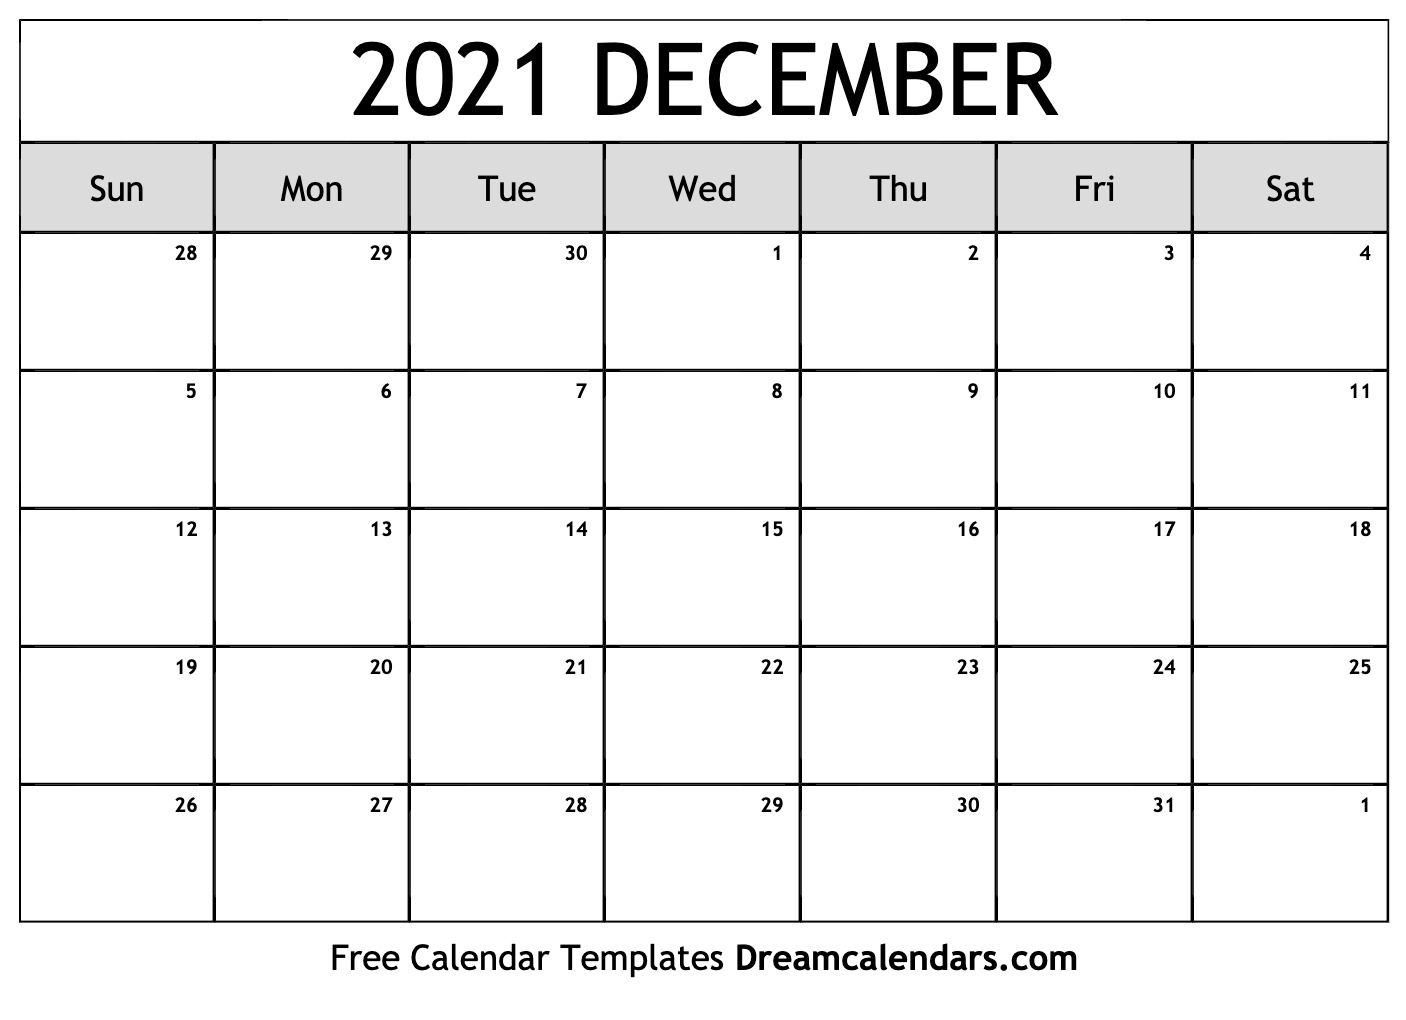 December 2021 Calendar. View The Free Printable Monthly